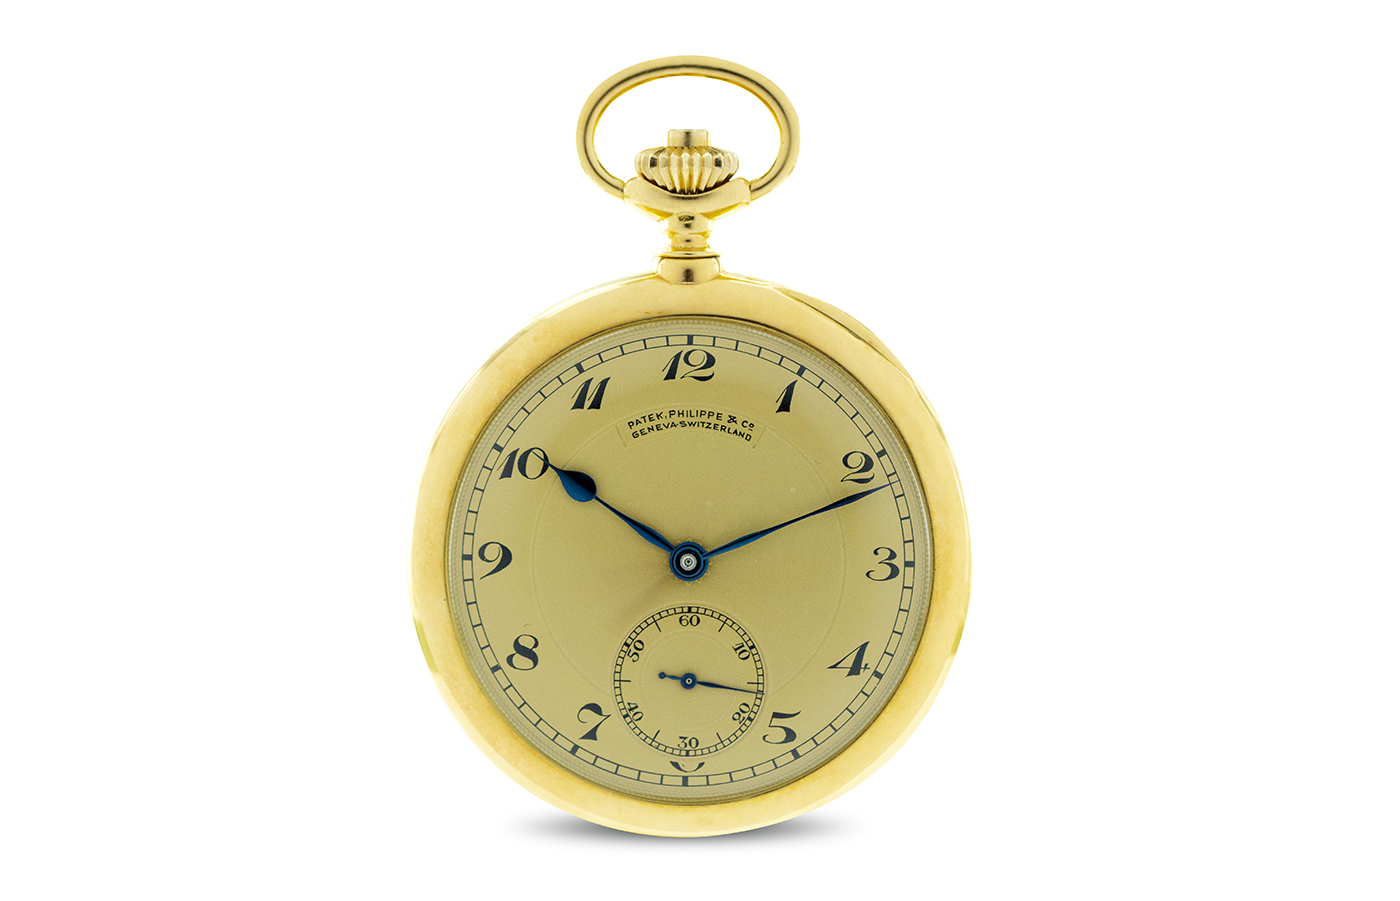 The Graves Patek Philippe two-train minute repeater pocket watch in yellow gold.